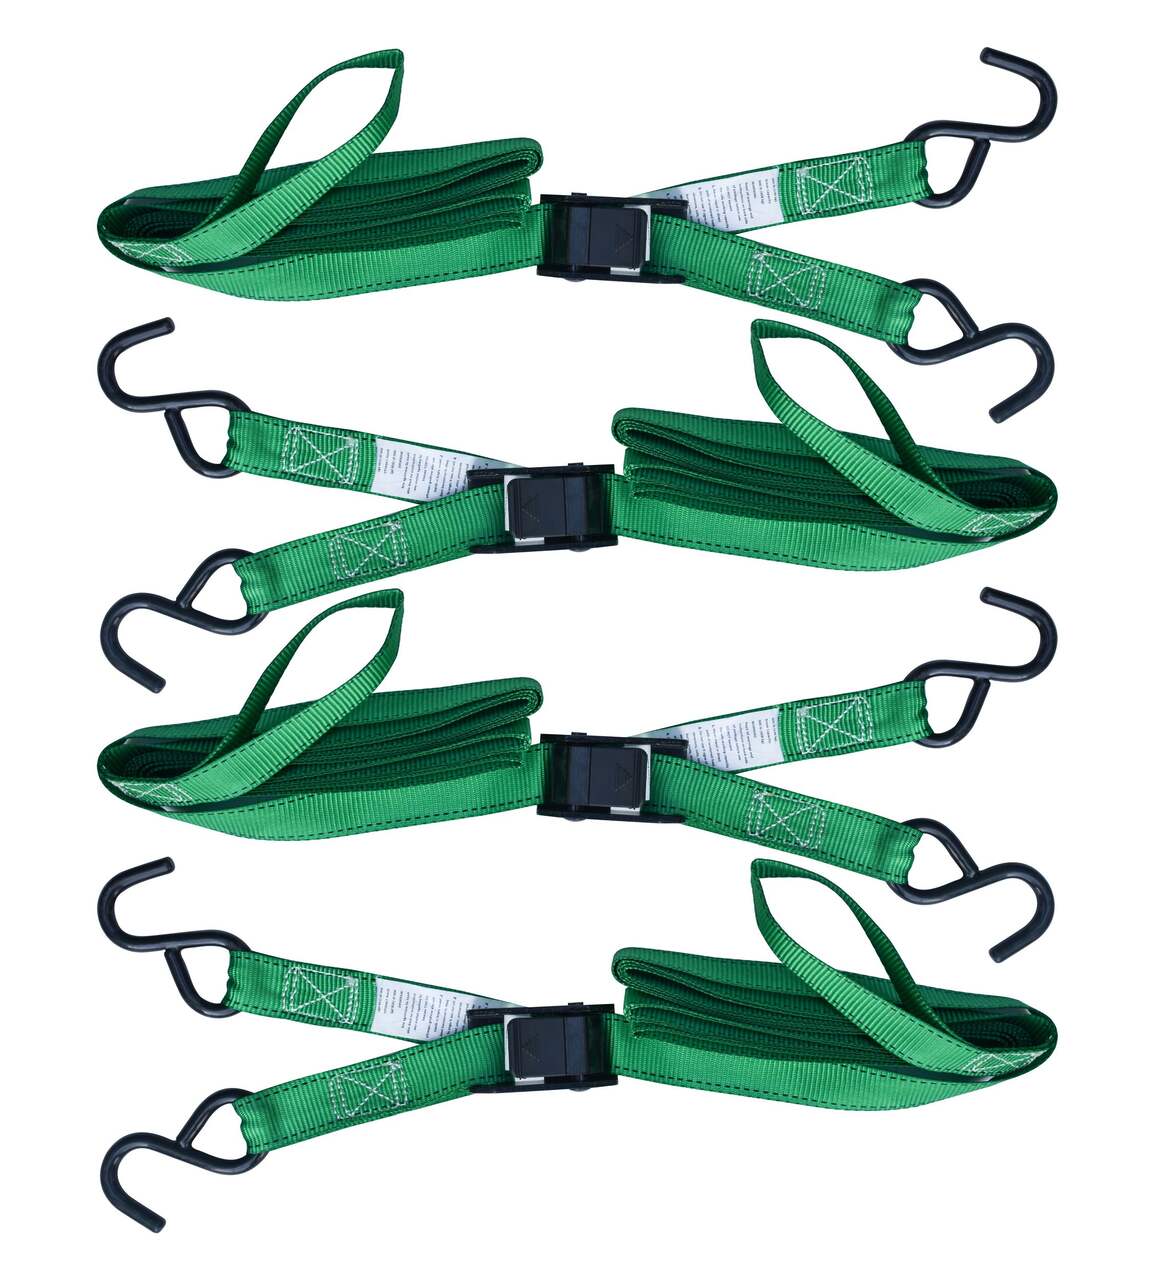 https://media-www.canadiantire.ca/product/automotive/automotive-outdoor-adventure/tarps-cords/0402616/10ft-900lb-cambuckle-tie-downs-4pk-258b823b-b36b-4625-8cbd-e8534cfc0f3e-jpgrendition.jpg?imdensity=1&imwidth=640&impolicy=mZoom